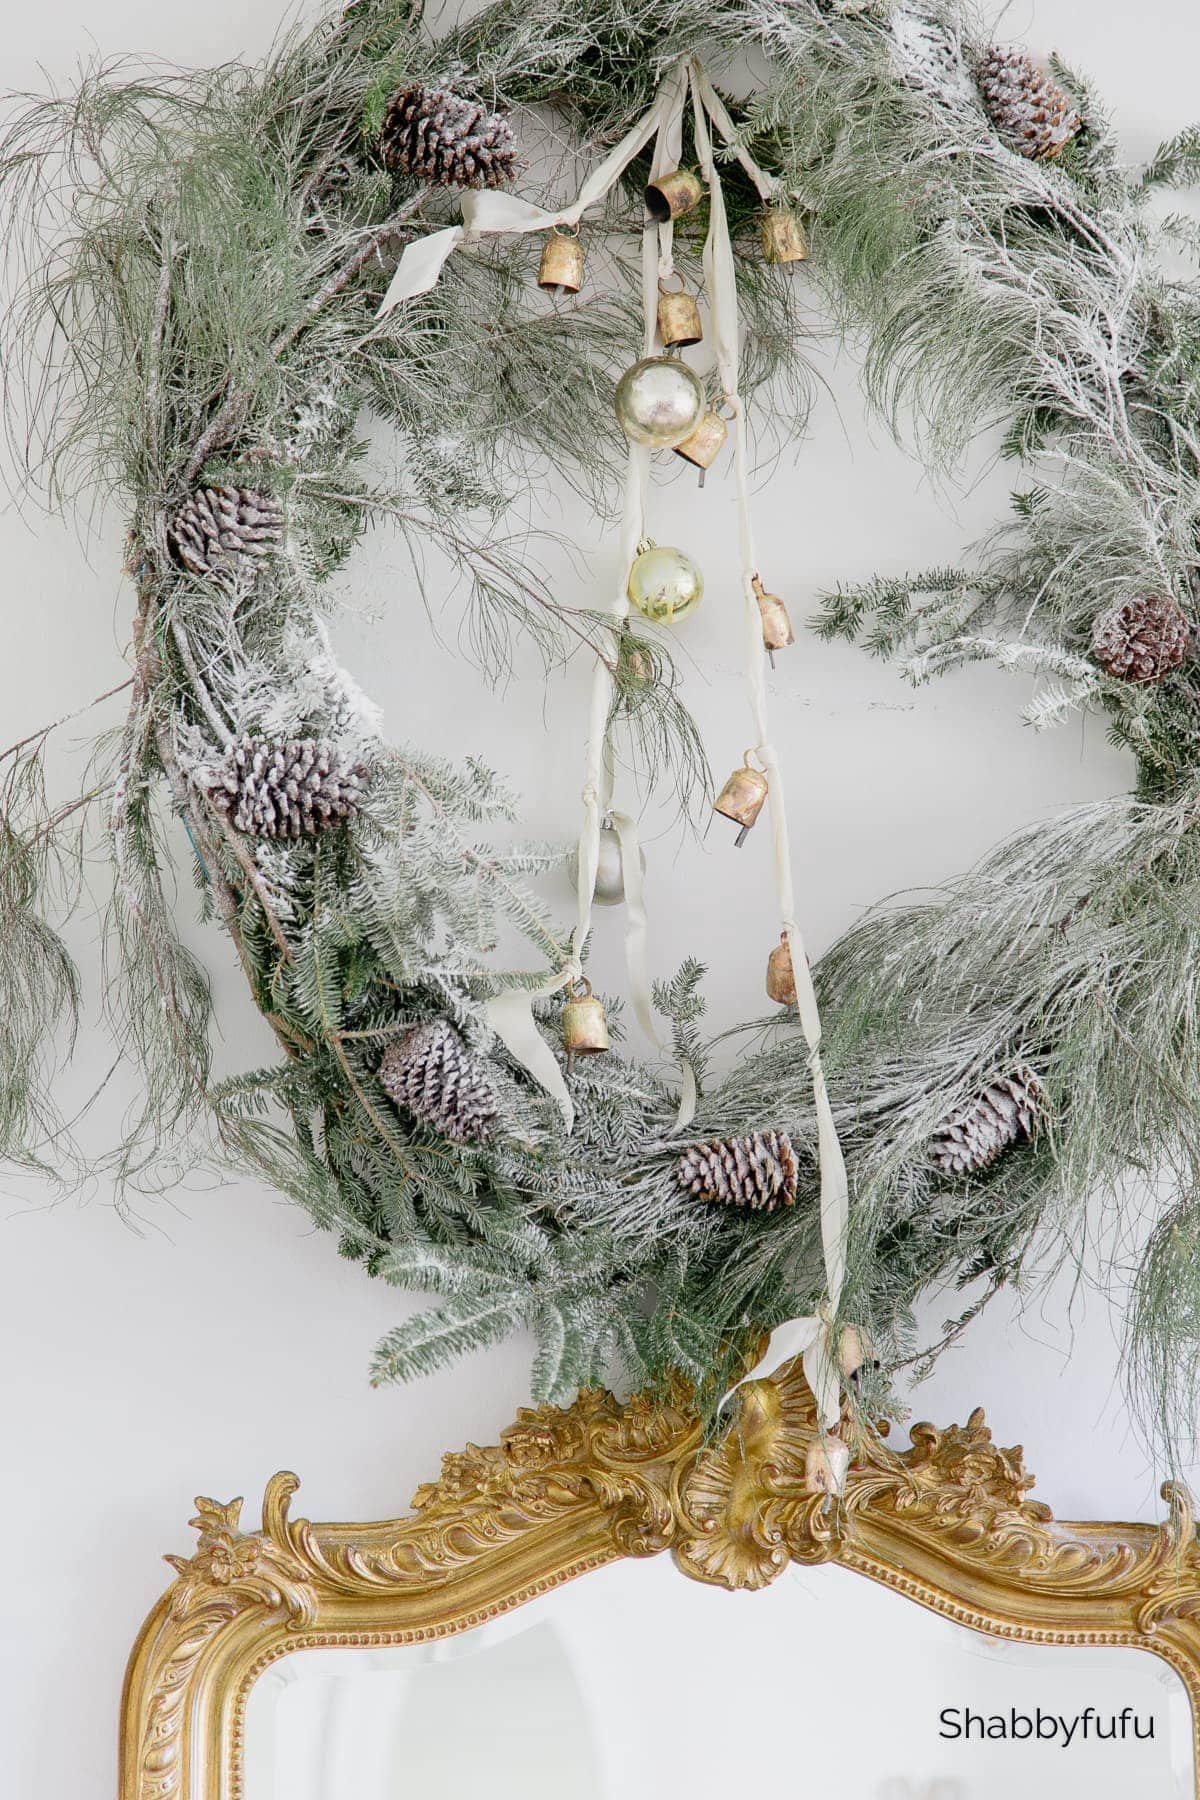 DIY Clay Ornaments, An Oversized Wreath To Make, Scented Pine Cone Tutorial & More!